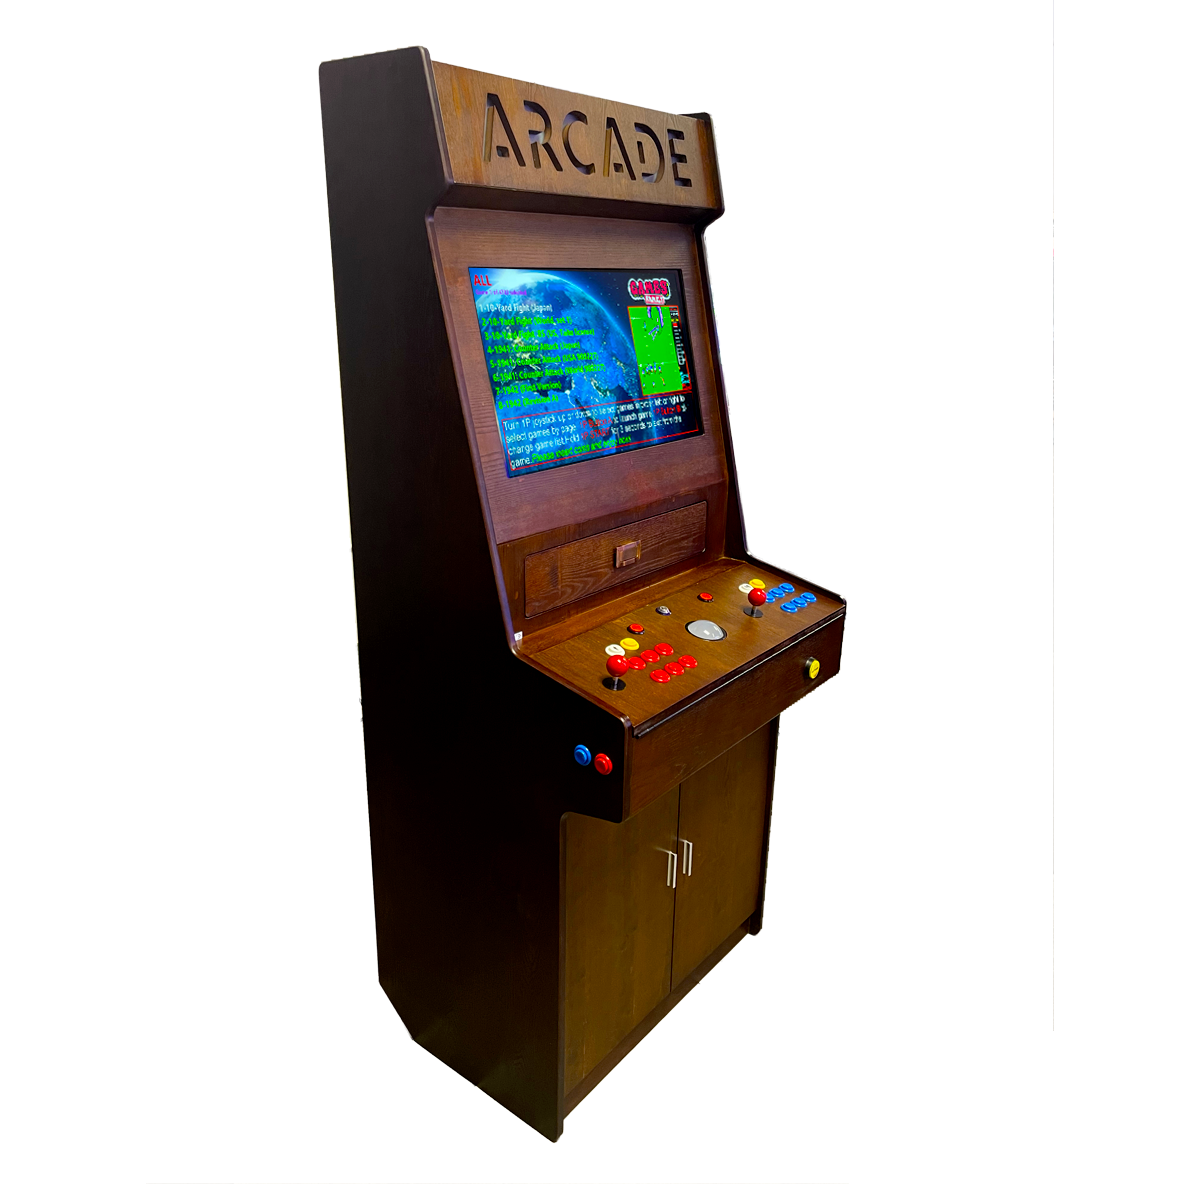 Full-sized two player upright arcade game with wood grain finish (7,000+ games)